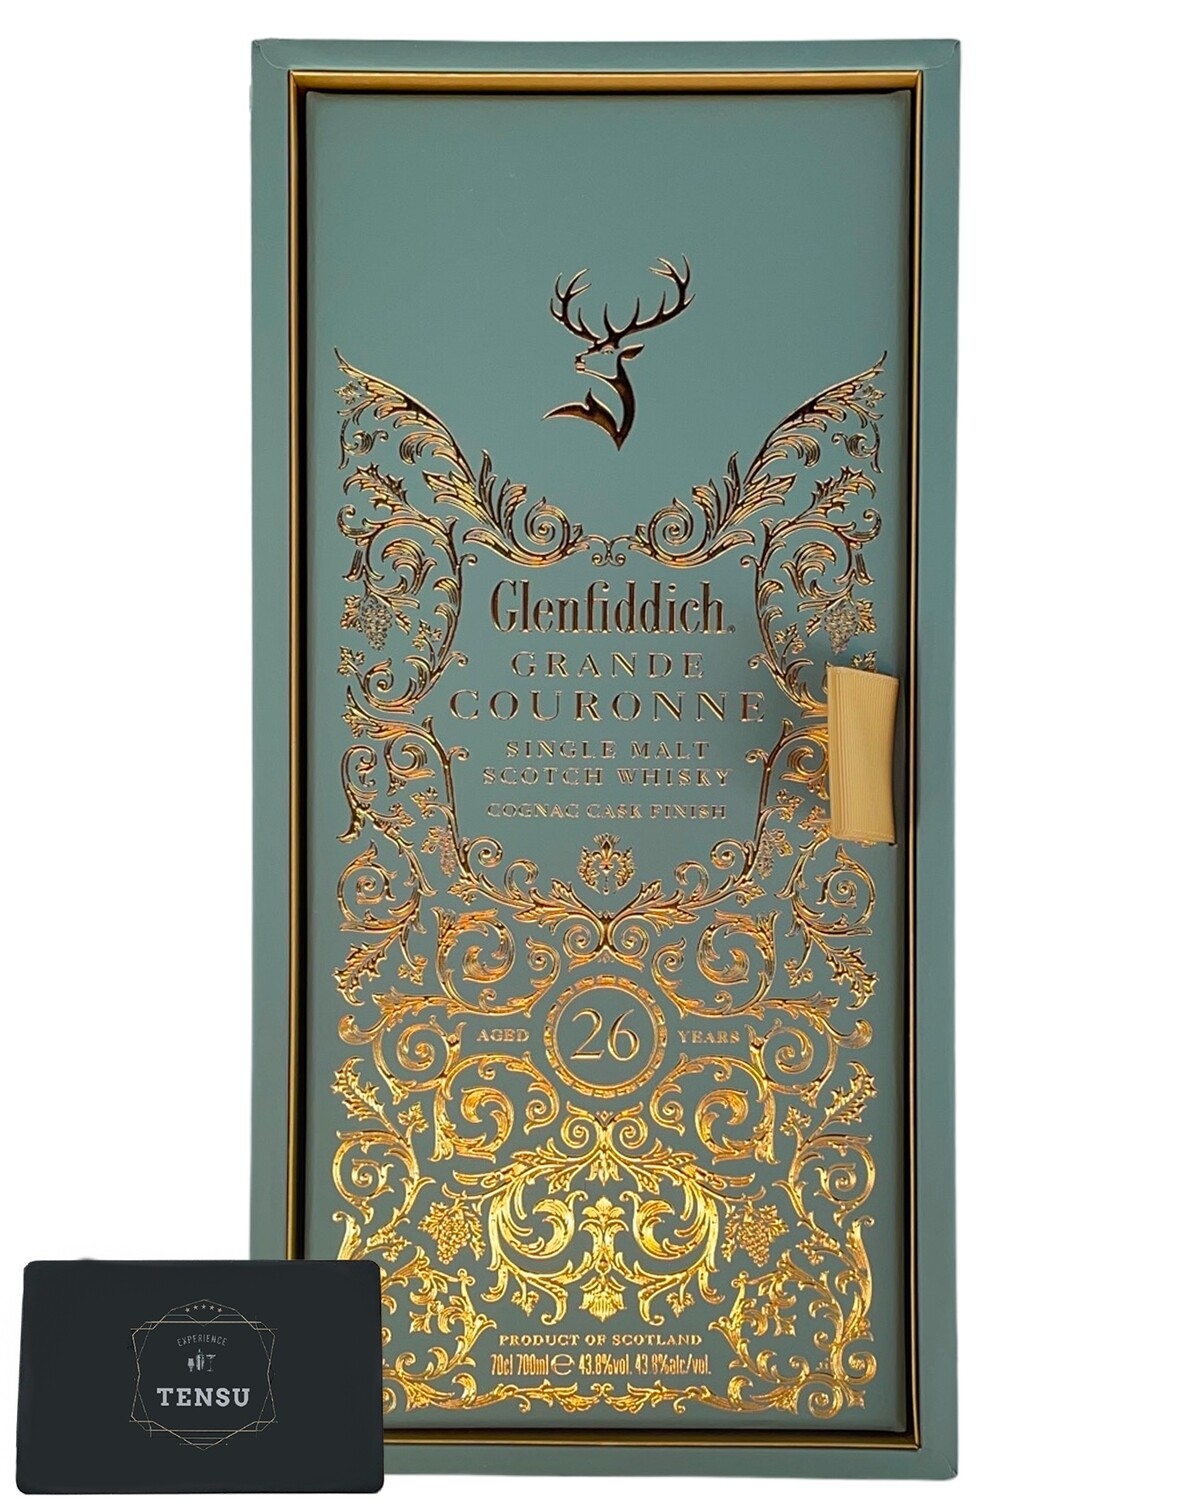 Glenfiddich 26 Years Old Grande Couronne 43.8 "OB"